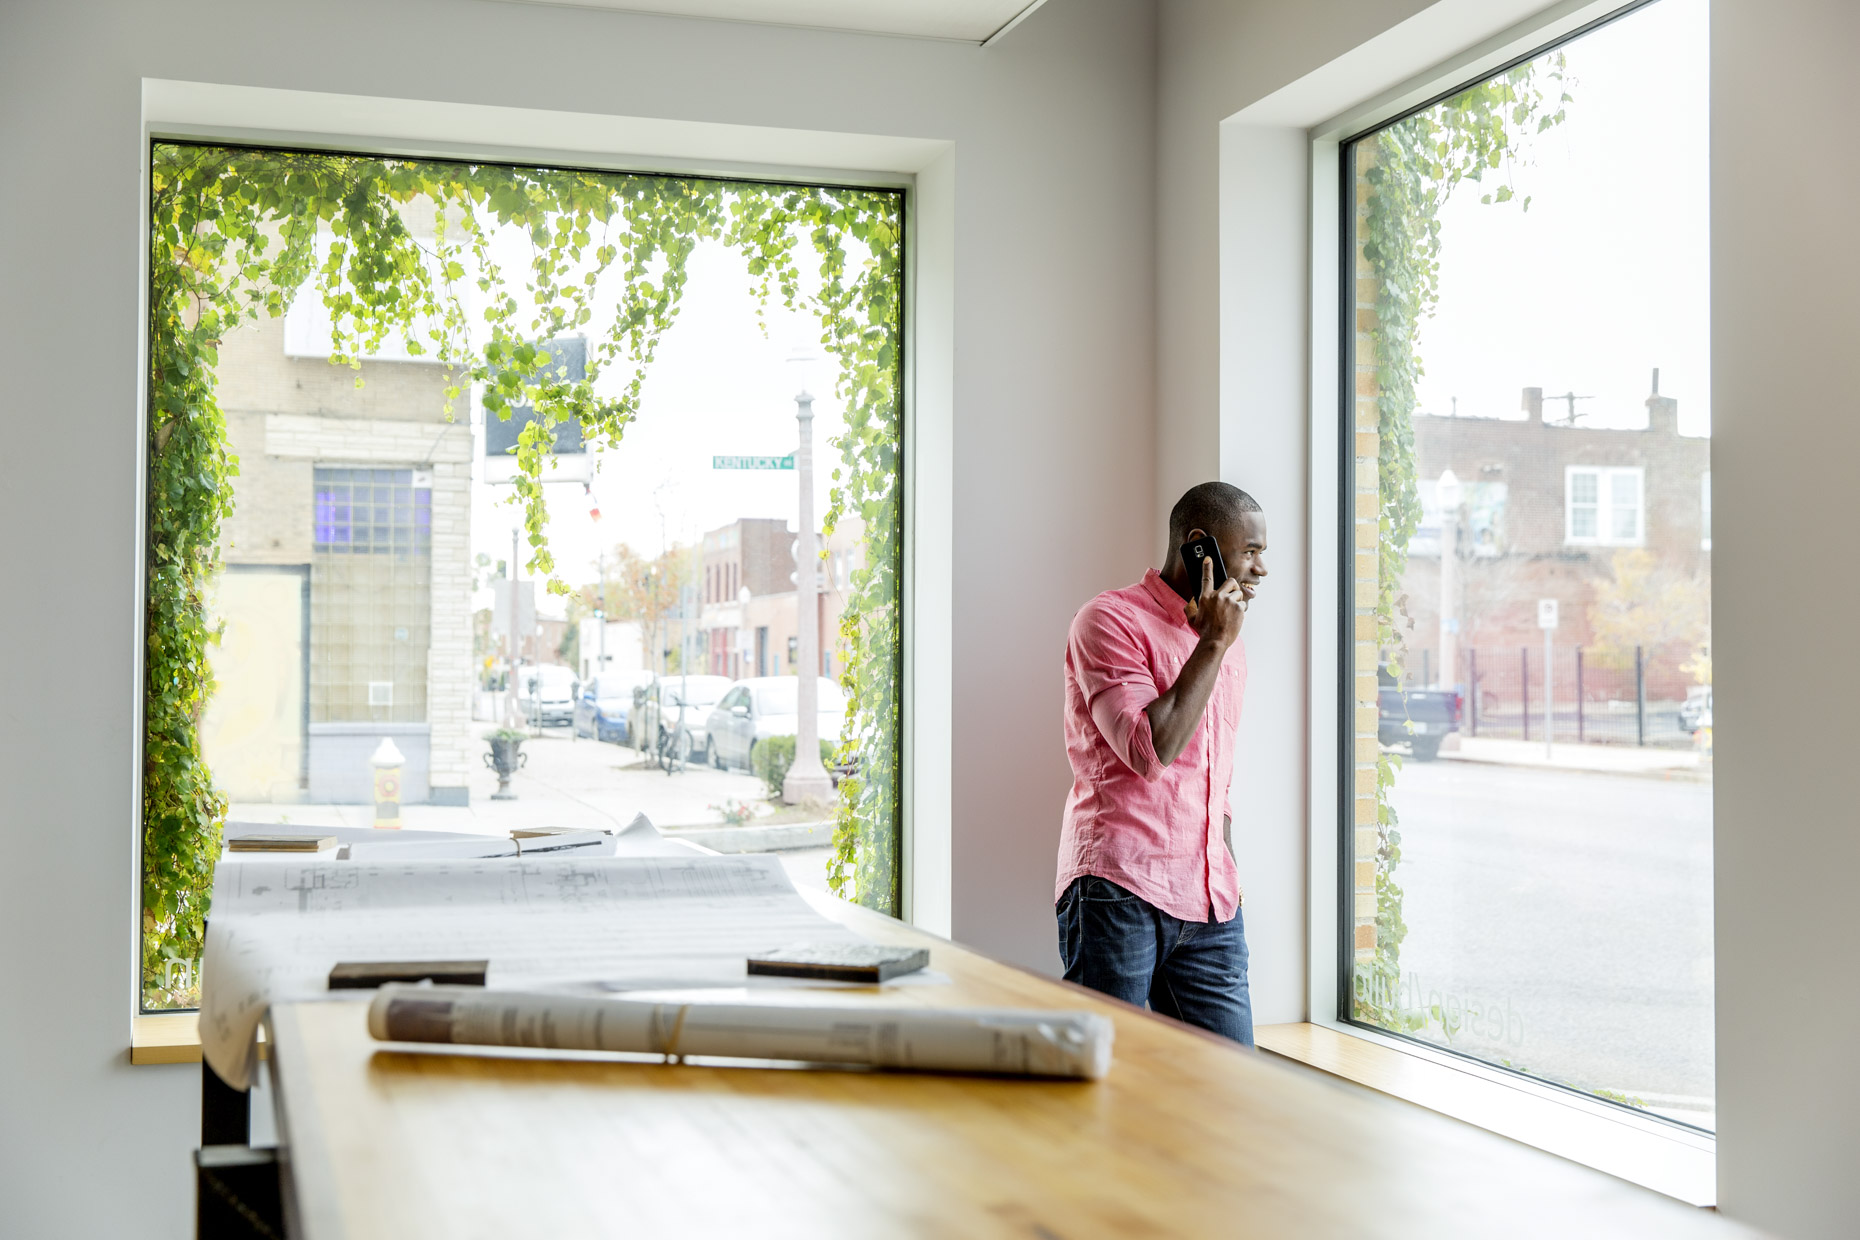 Black architect talking on the phone looking out window